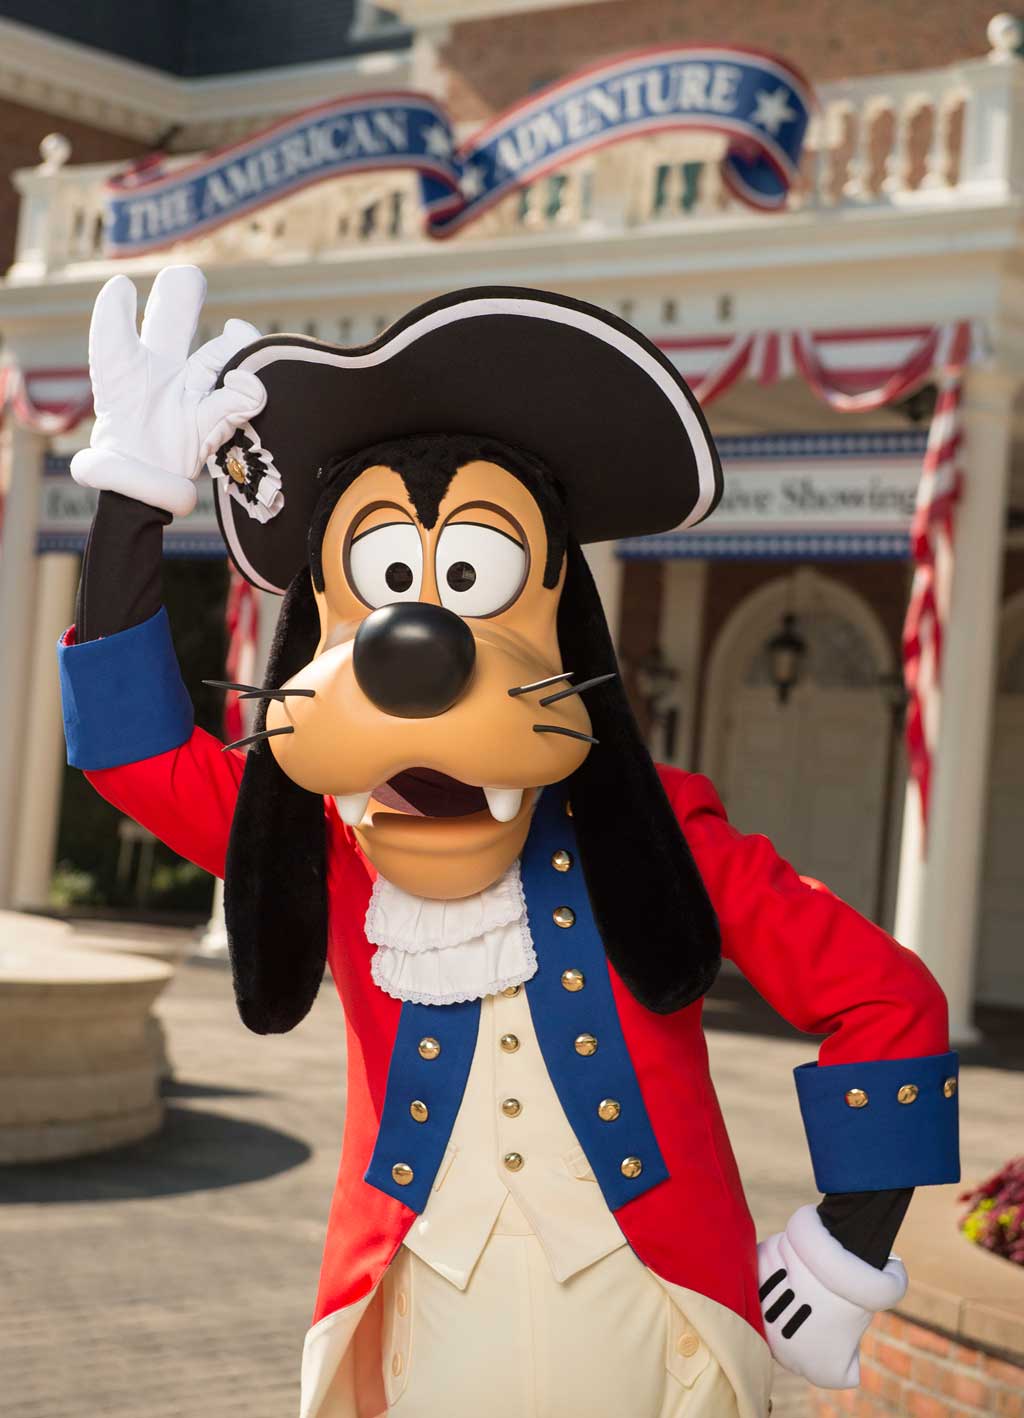 Goofy dresses in his patriotic best to celebrate the Fourth of July at Walt Disney World Resort. Goofy, along with Mickey Mouse and Donald Duck, appear for meet and greets at the American Adventure at Epcot for the holiday. (David Roark, photographer)